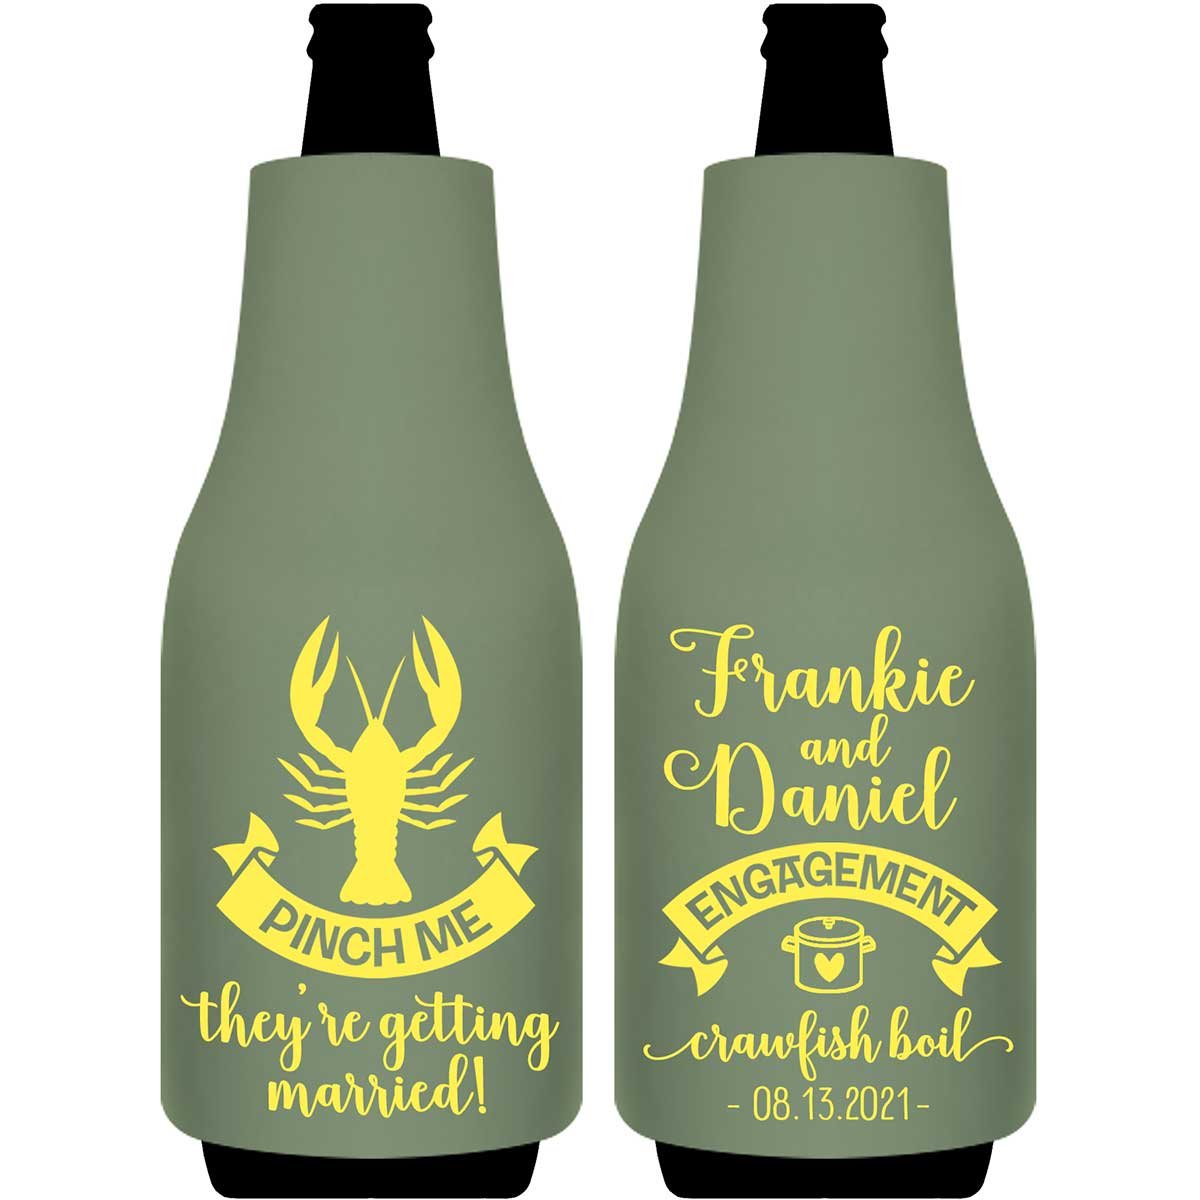 Pinch Me They're Getting Married Crawfish Boil Foldable Bottle Sleeve Koozies Wedding Gifts for Guests